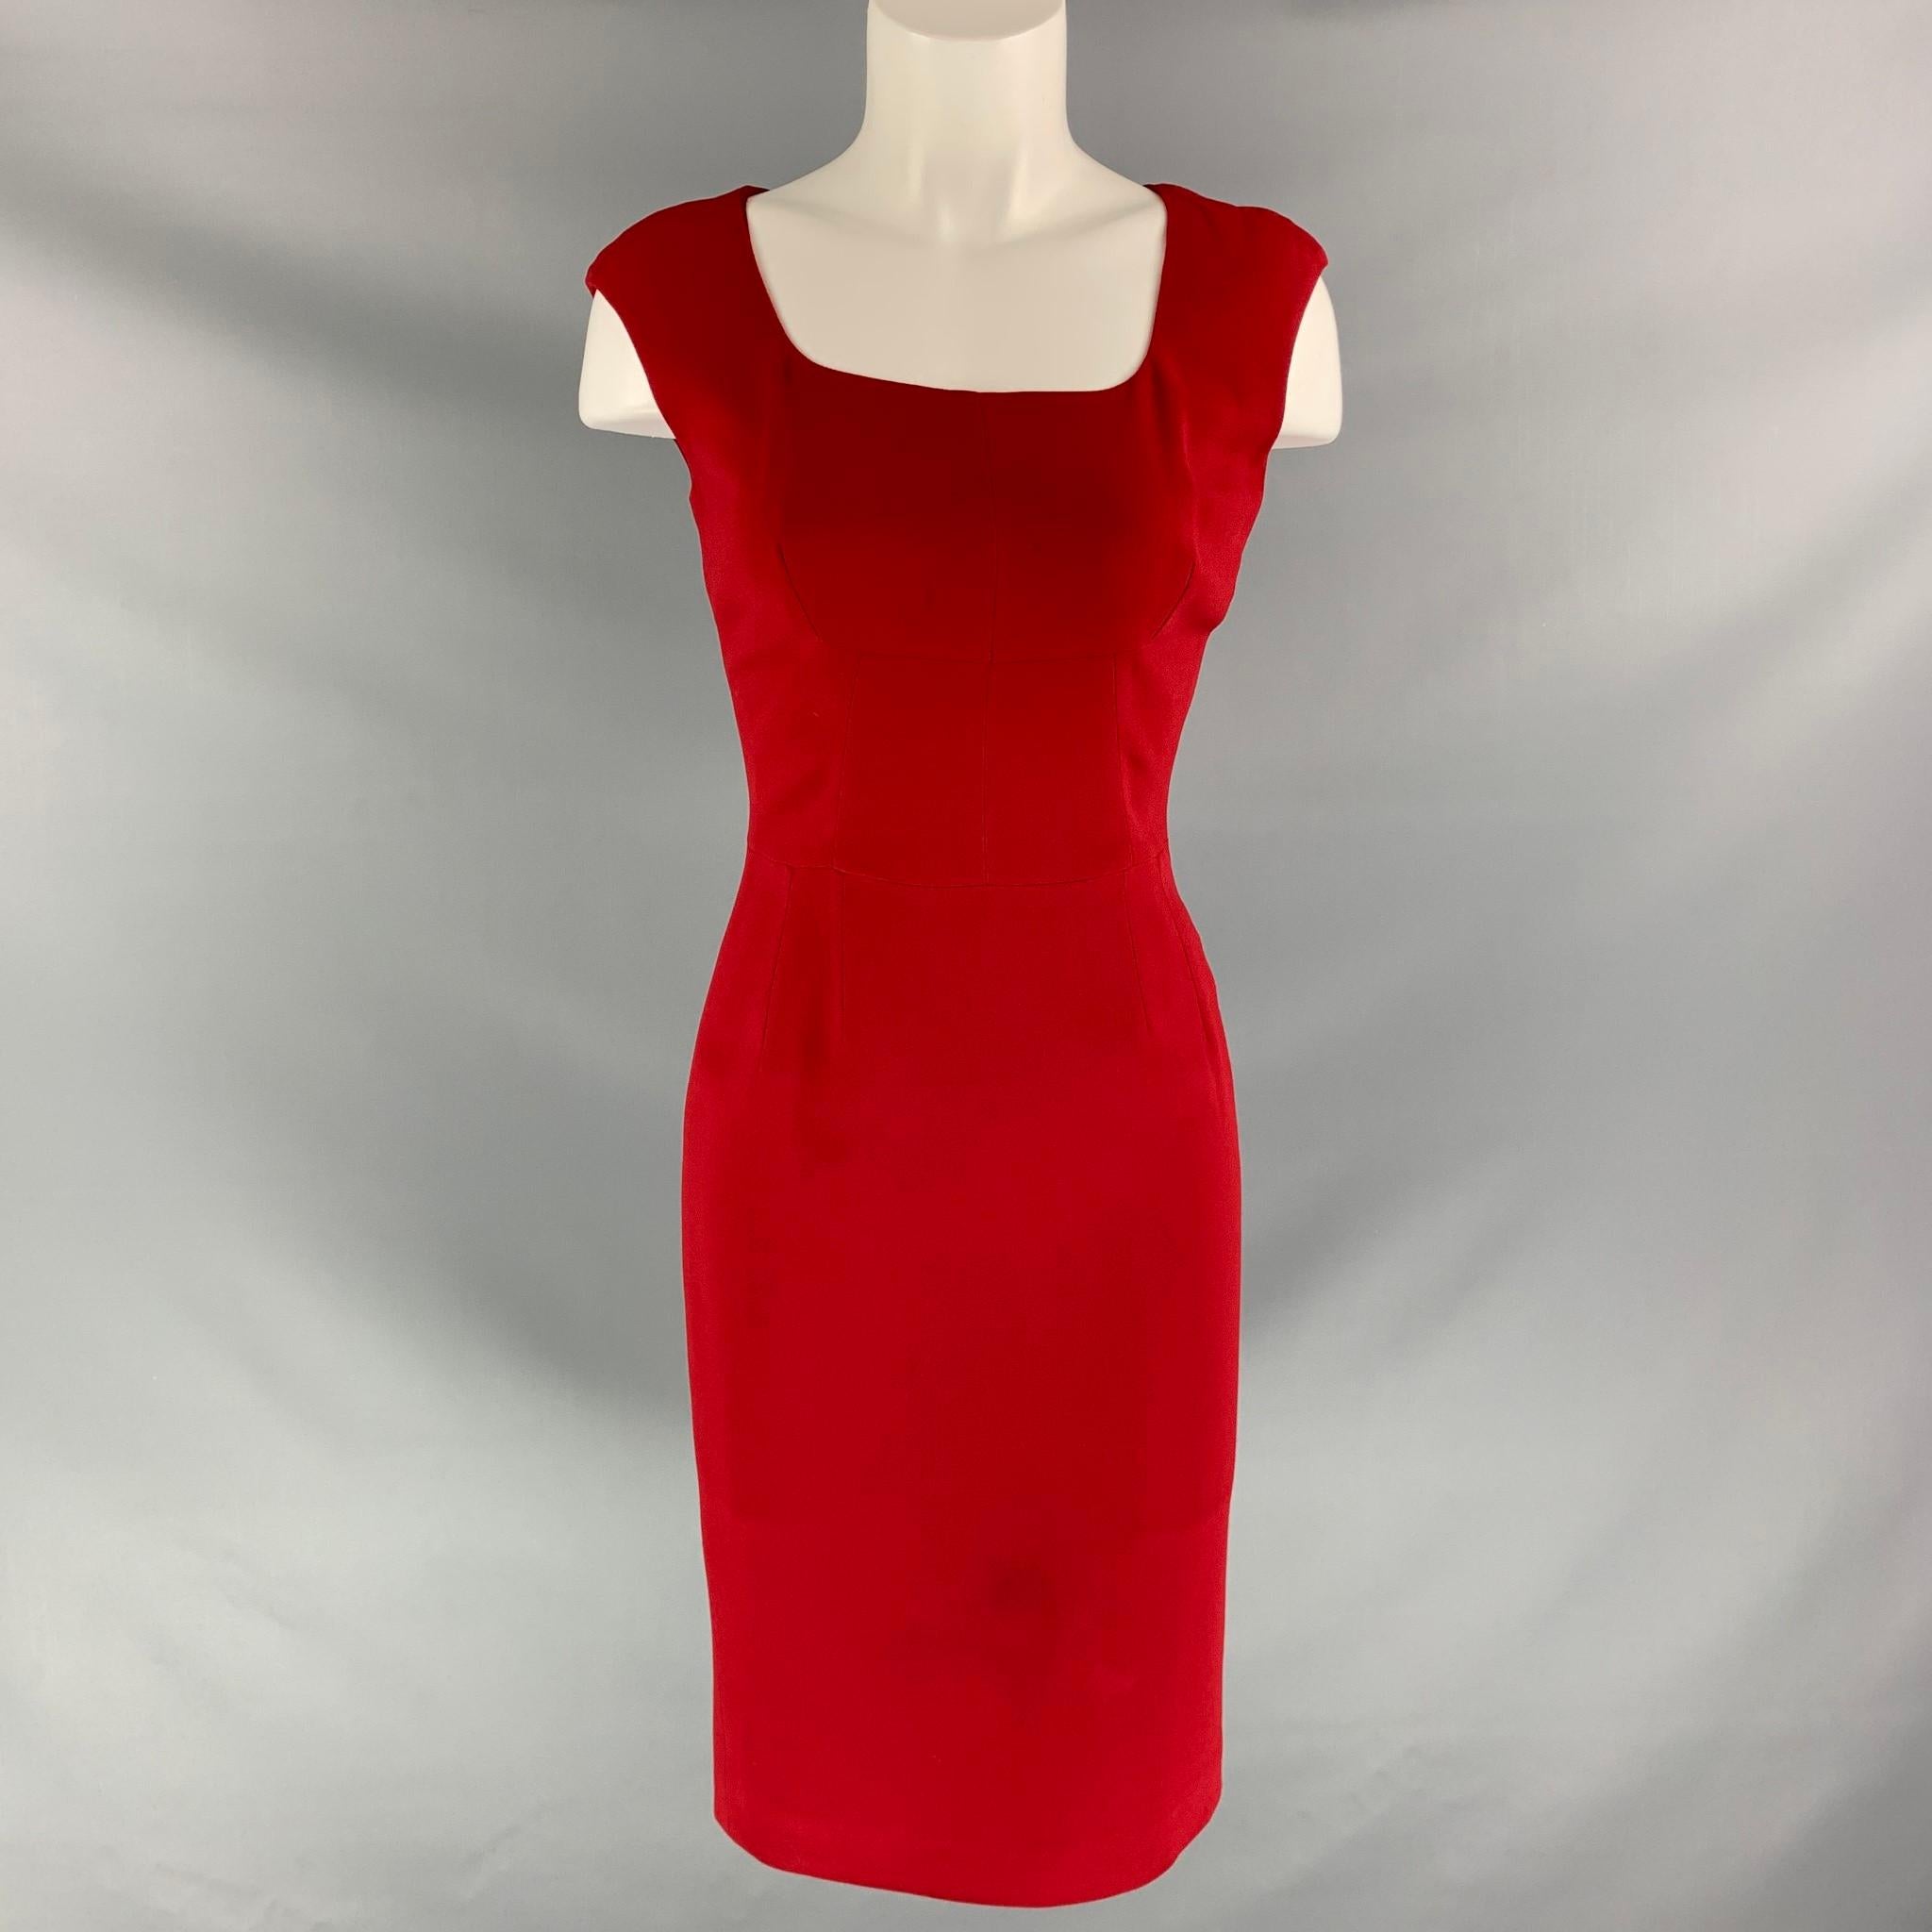 DOLCE & GABBANA mid-calf dress comes in red viscose blend fabric, full zip closure at back, satin lined and scoop neck.

Fair Pre-Owned Condition. Moderate marks and discoloration at bottom, near to neck line and back.
Marked: